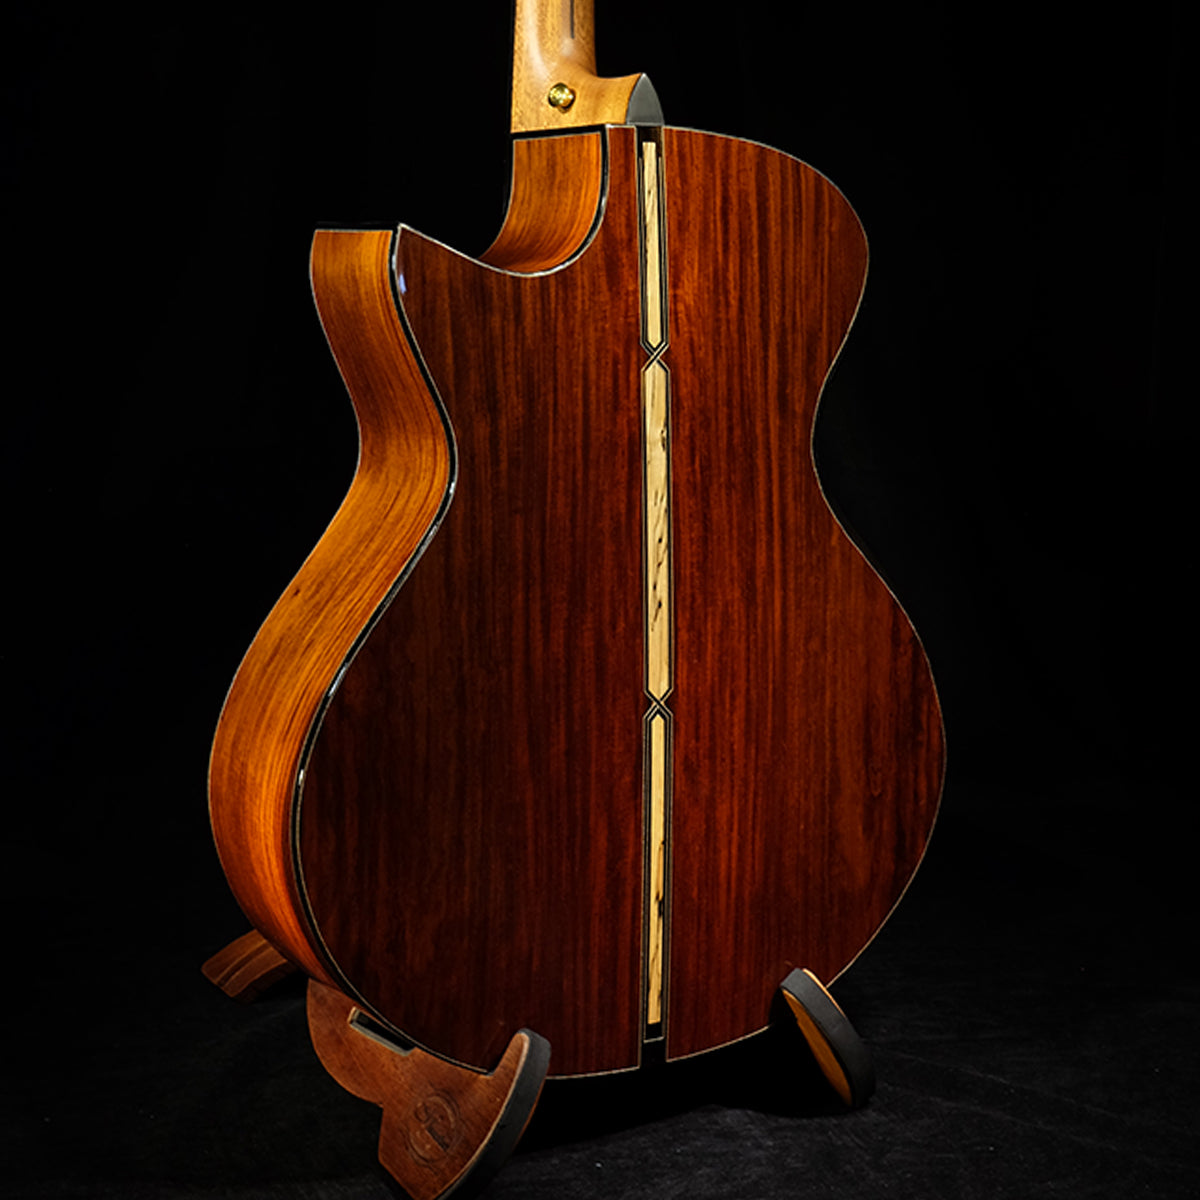 Blue Label MJ Sitka Spruce with Mexican Cocobolo| #9